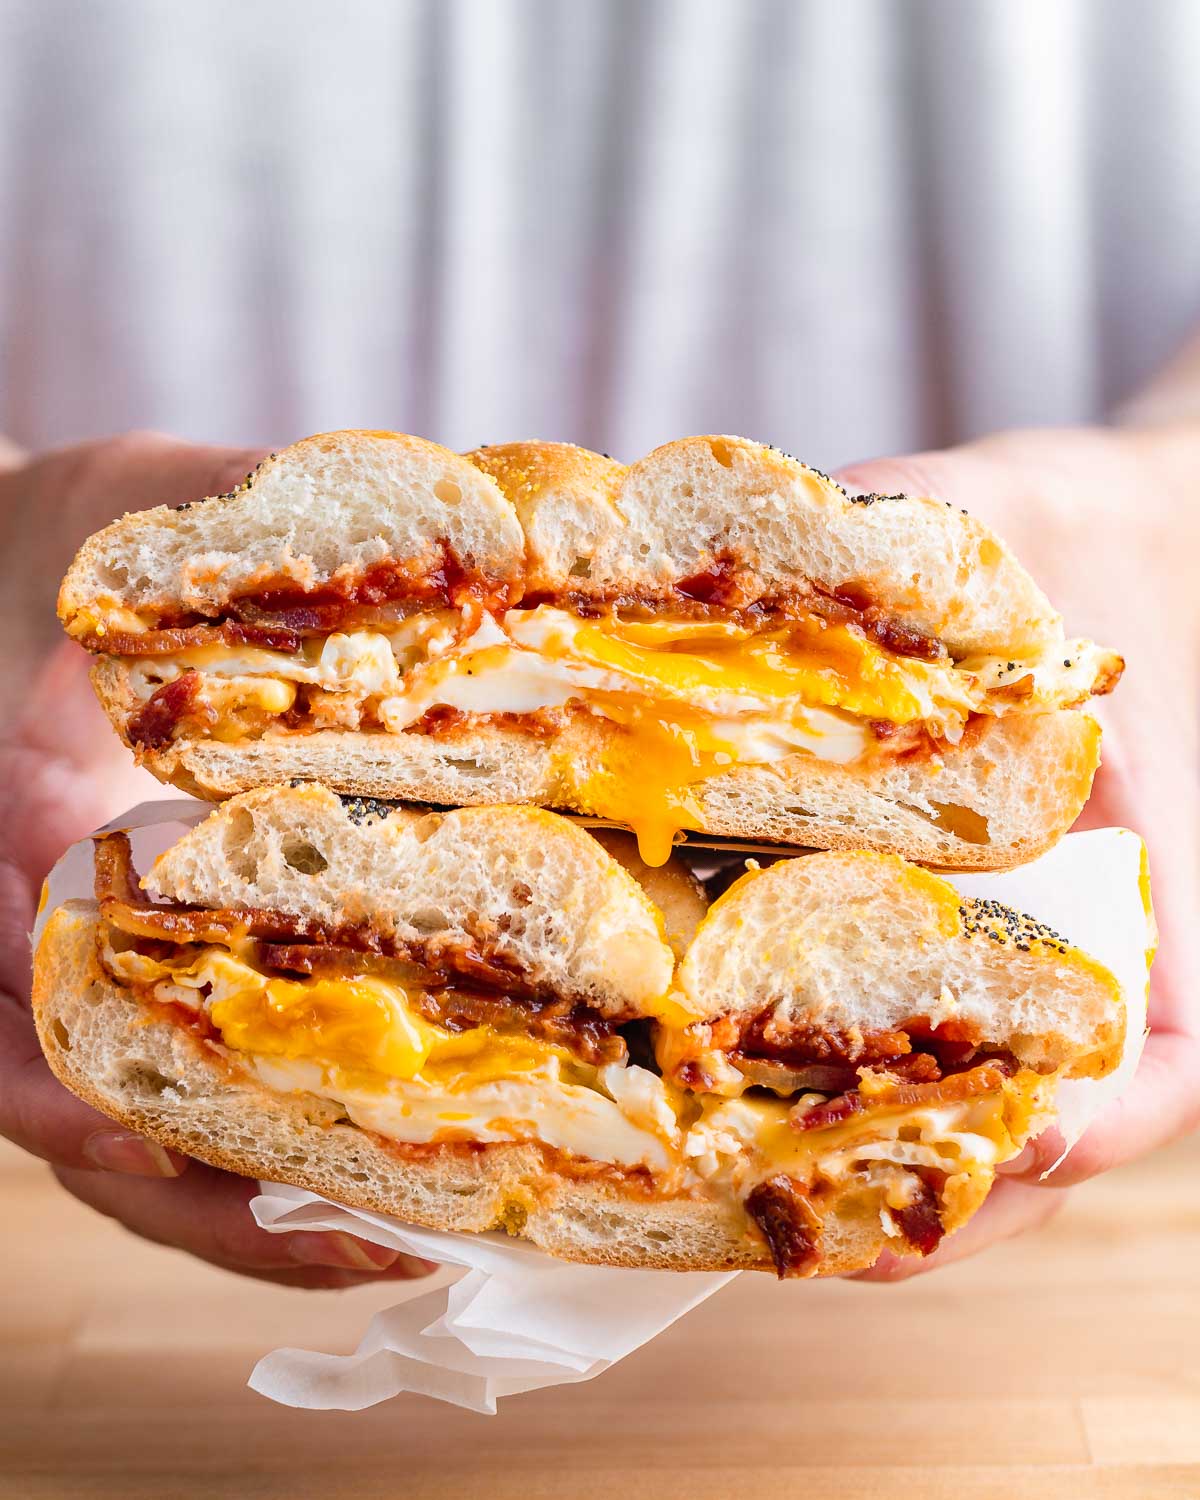 Hands holding a bacon egg and cheese sandwich cut in half with the yolk dripping.